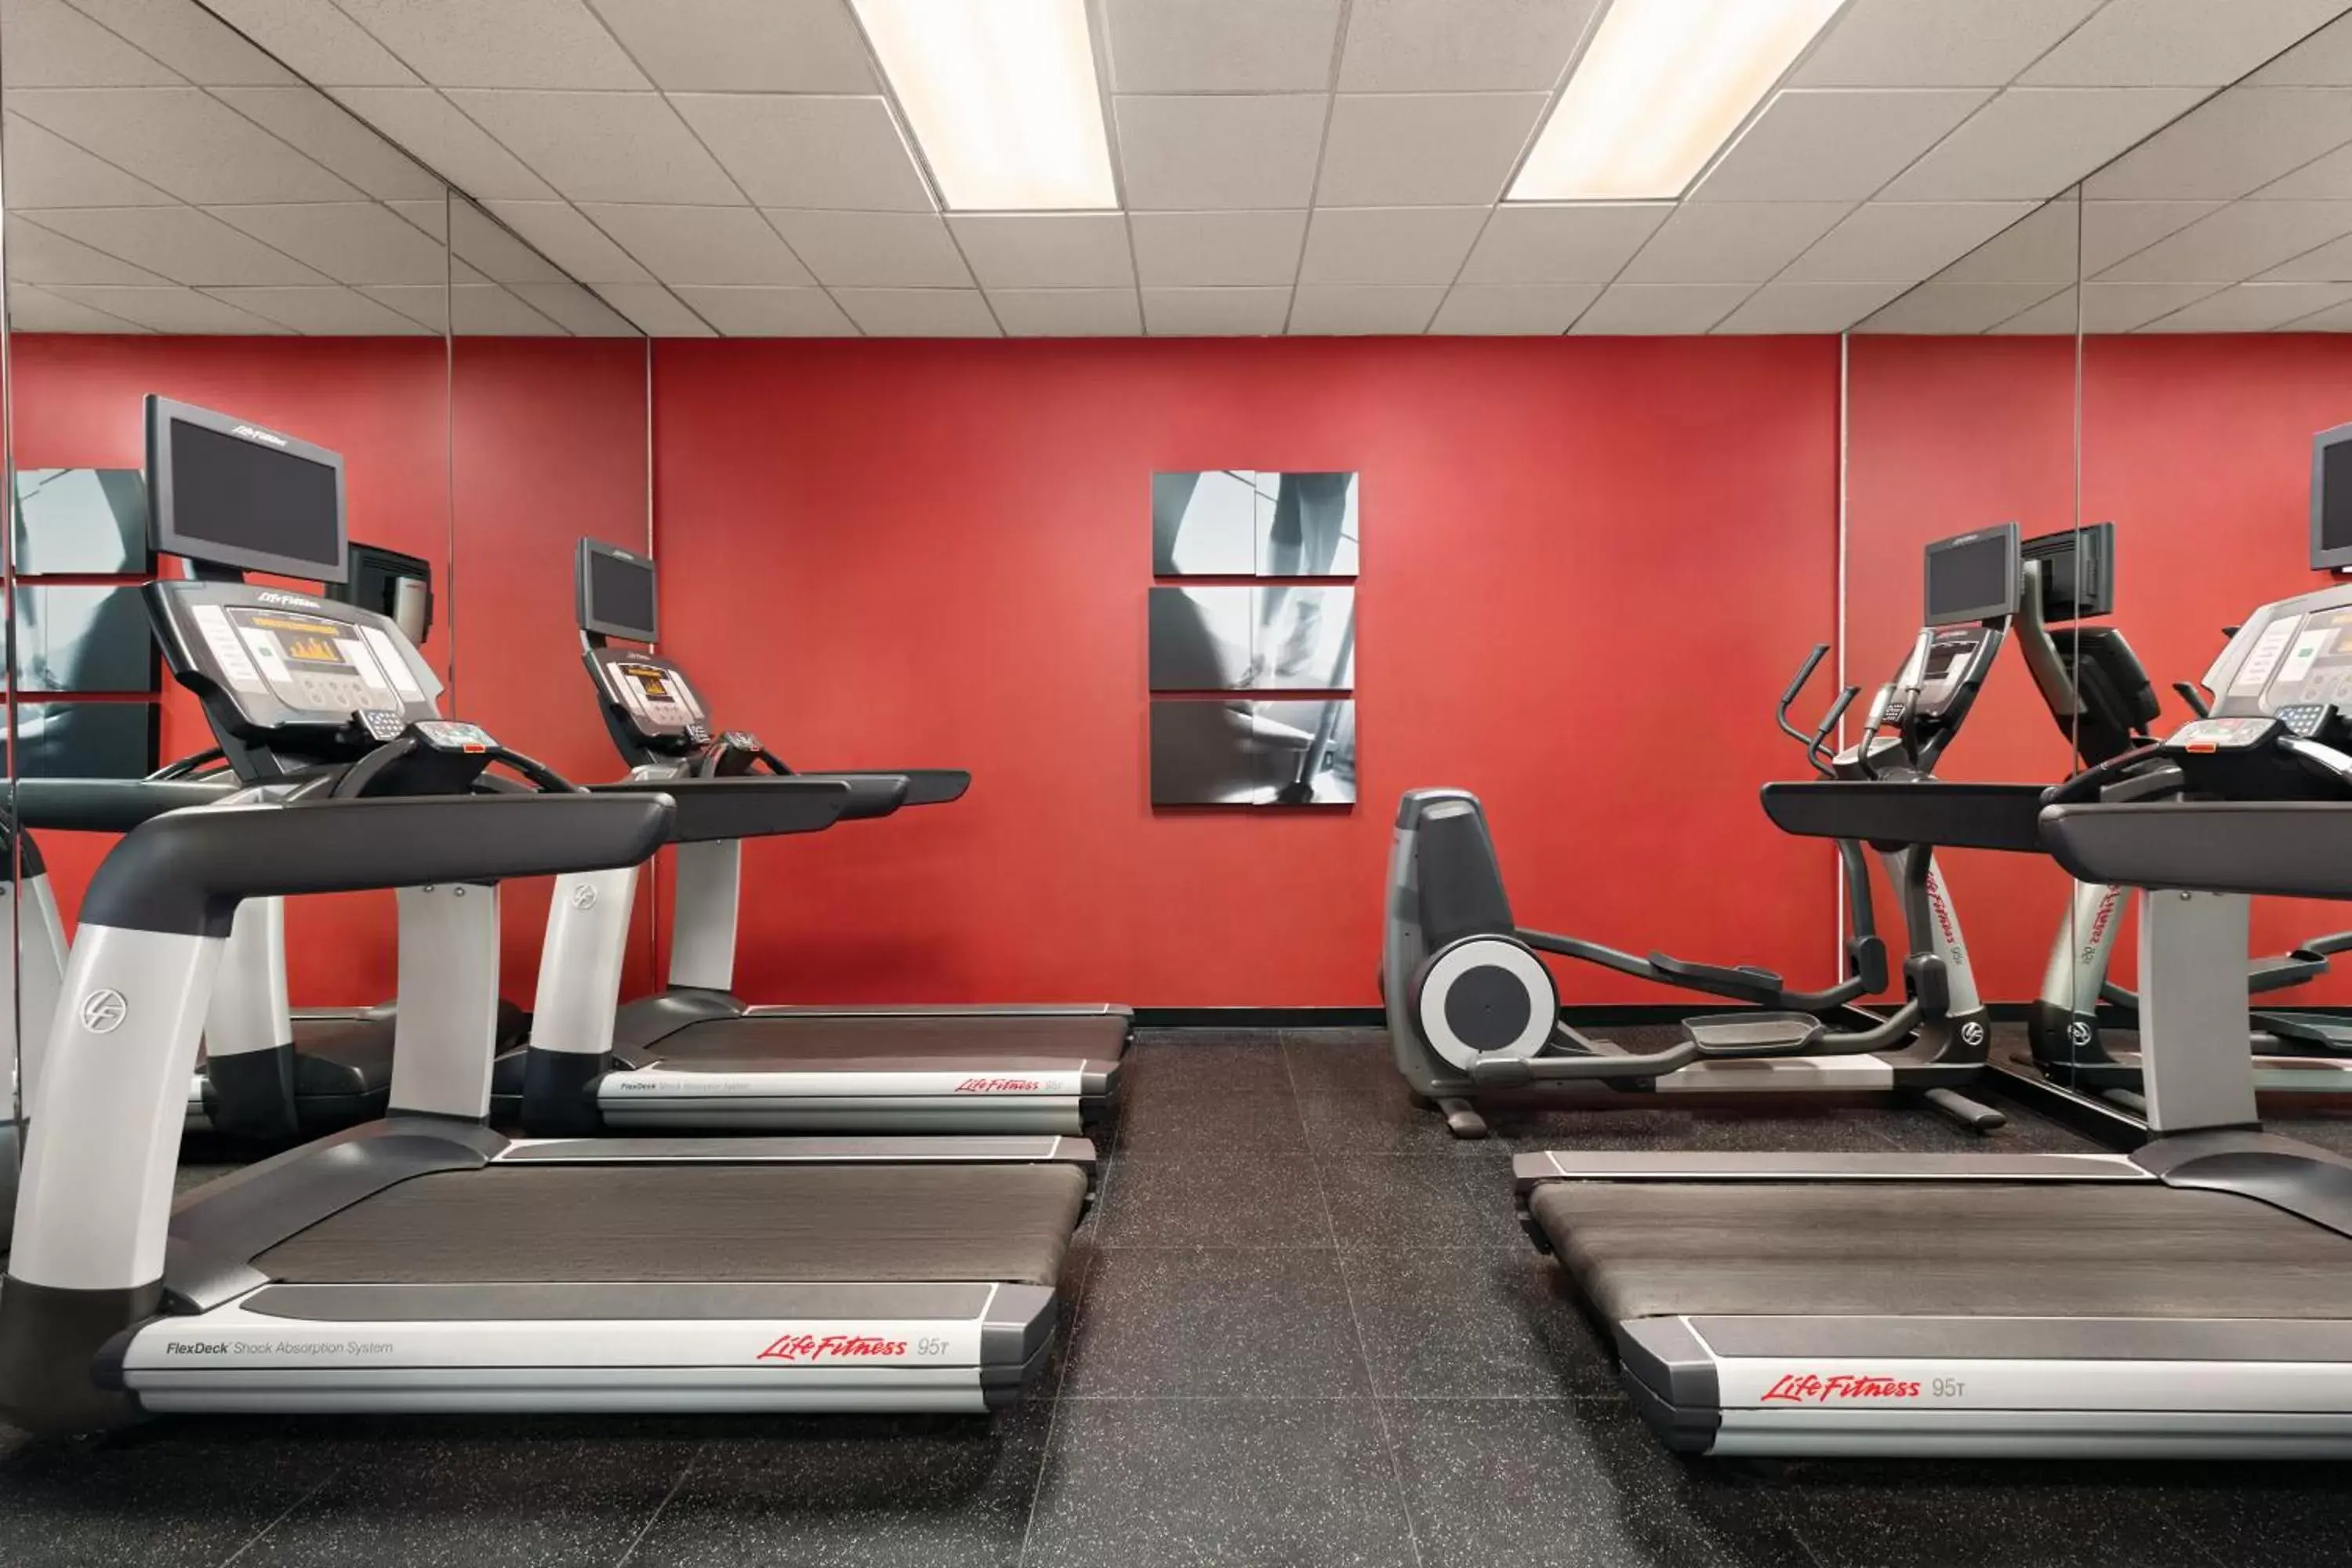 Fitness centre/facilities, Fitness Center/Facilities in Radisson Hotel Seattle Airport